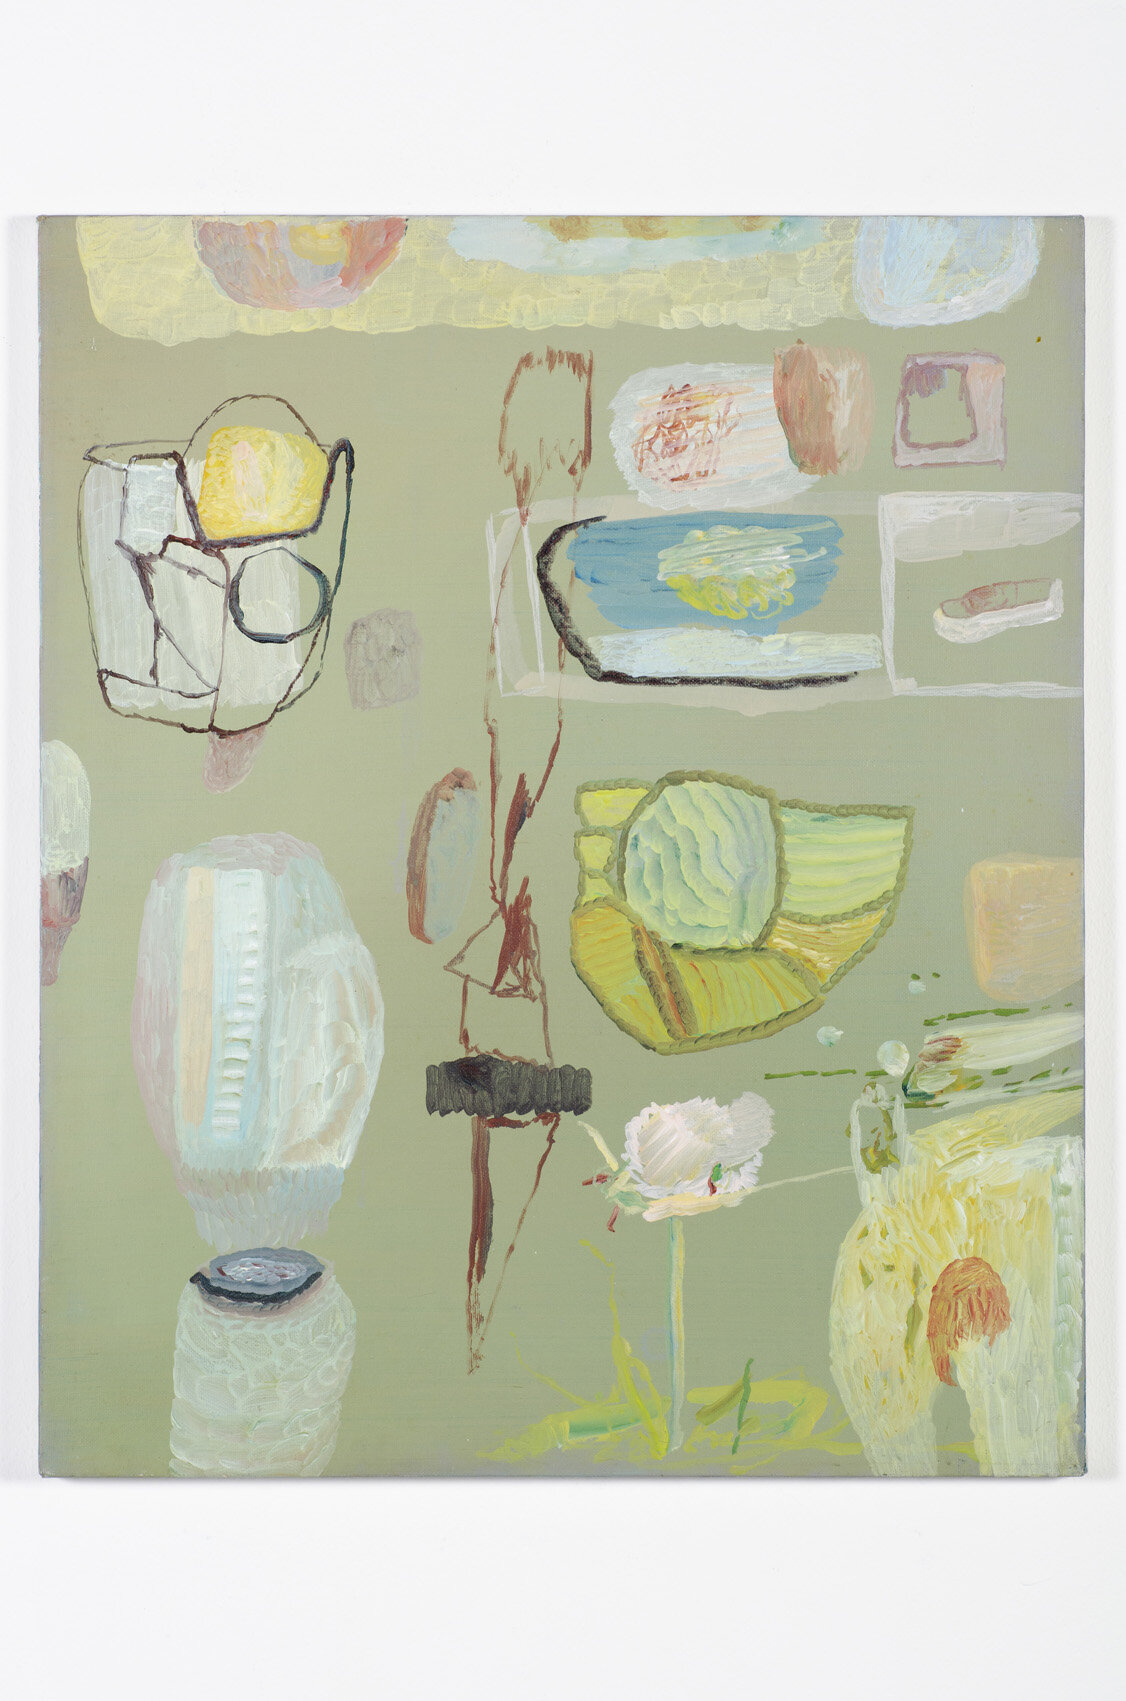  Ian WOO  Lake in a Small Study Room  1998 Acrylic on canvas H61 x W51 cm 